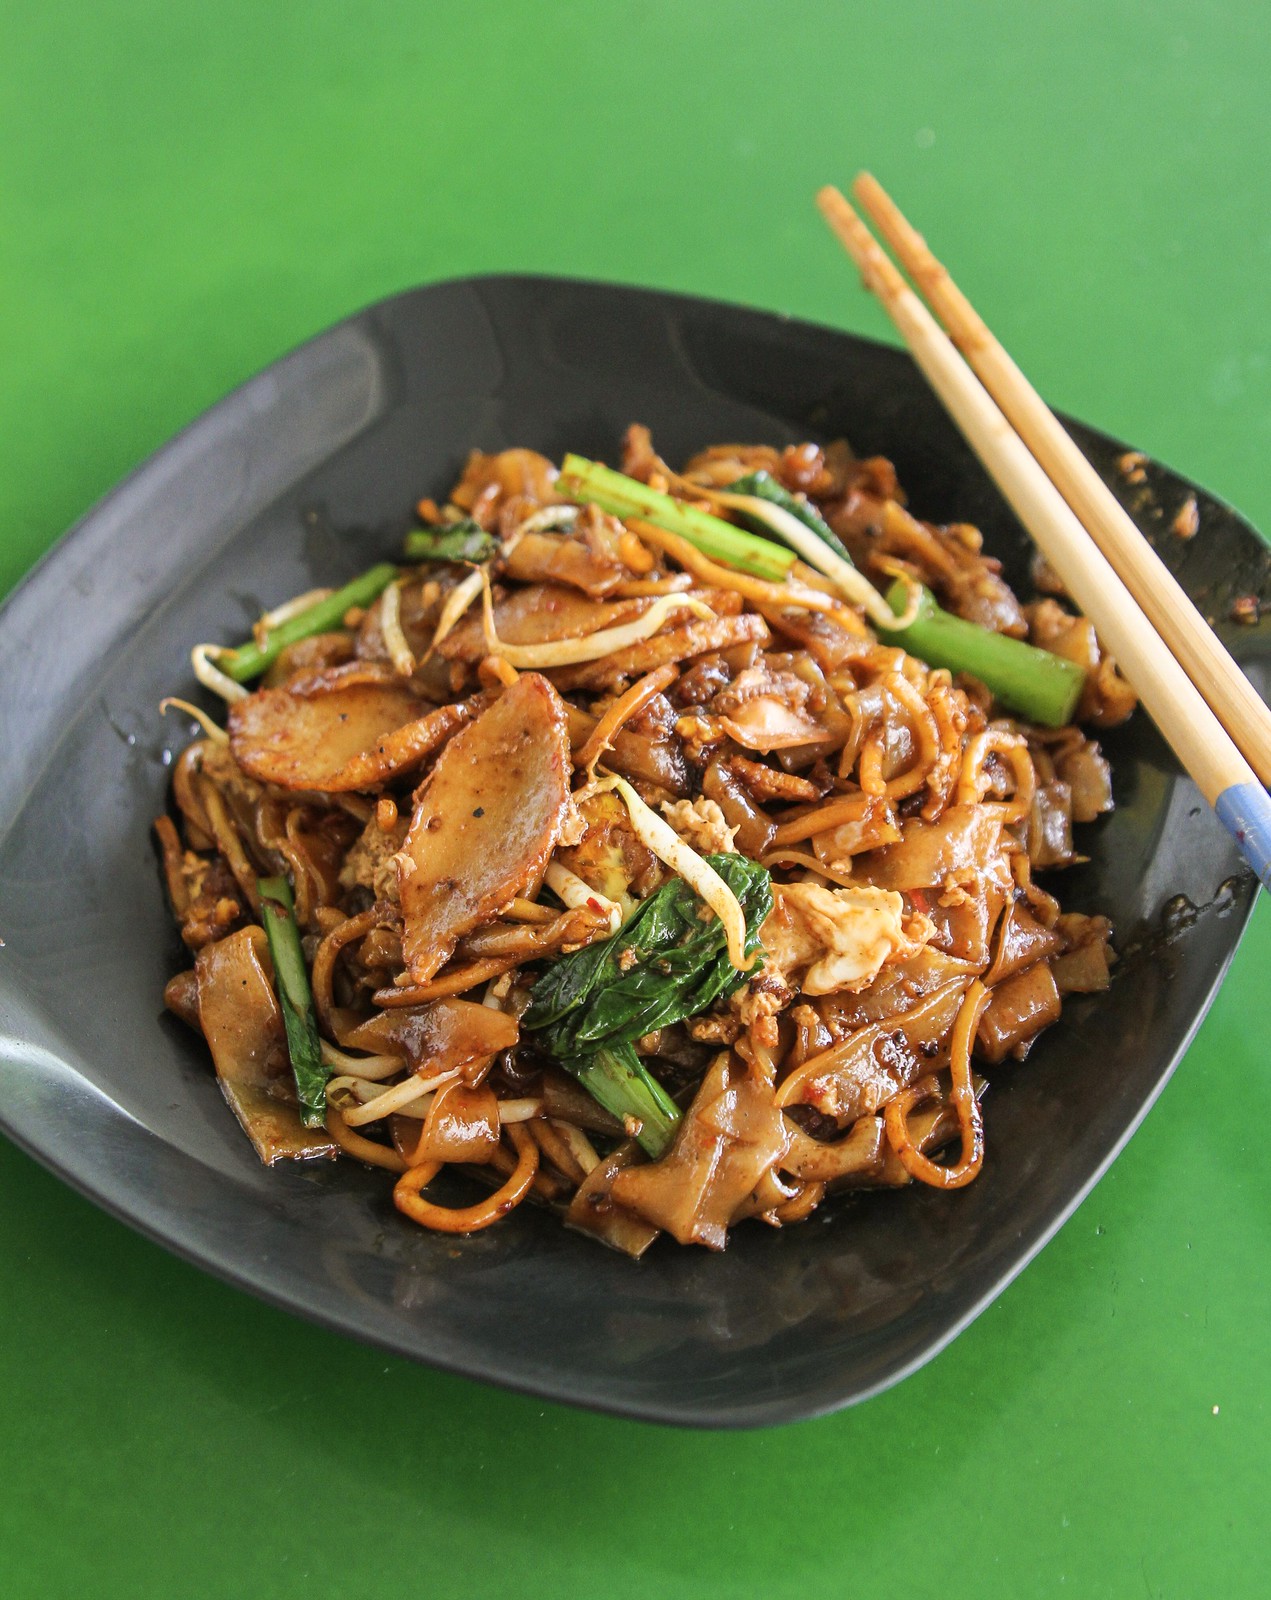 Timah Kway Teow